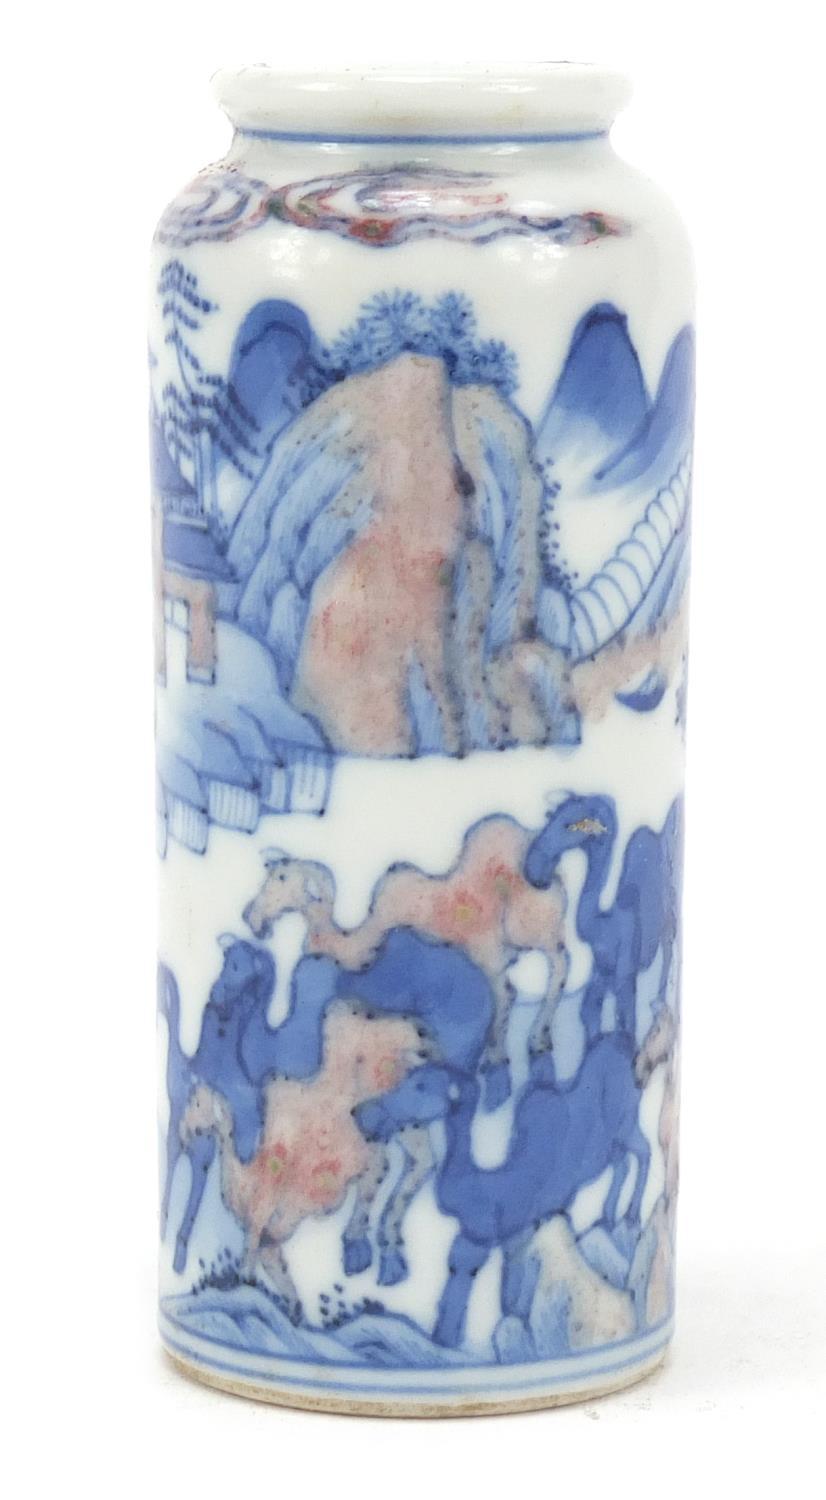 Chinese blue and white with iron red porcelain snuff bottle hand painted with a figure and animals - Image 2 of 8